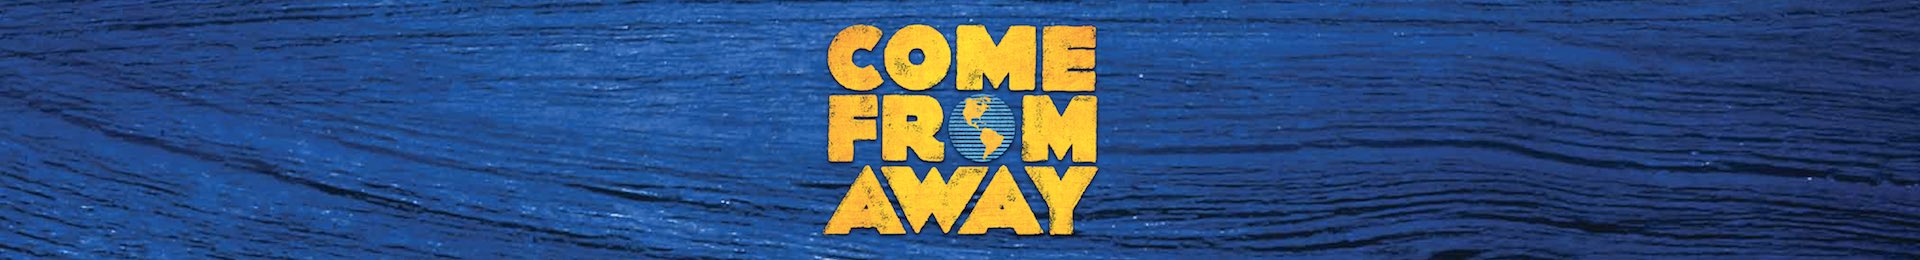 Come From Away banner image